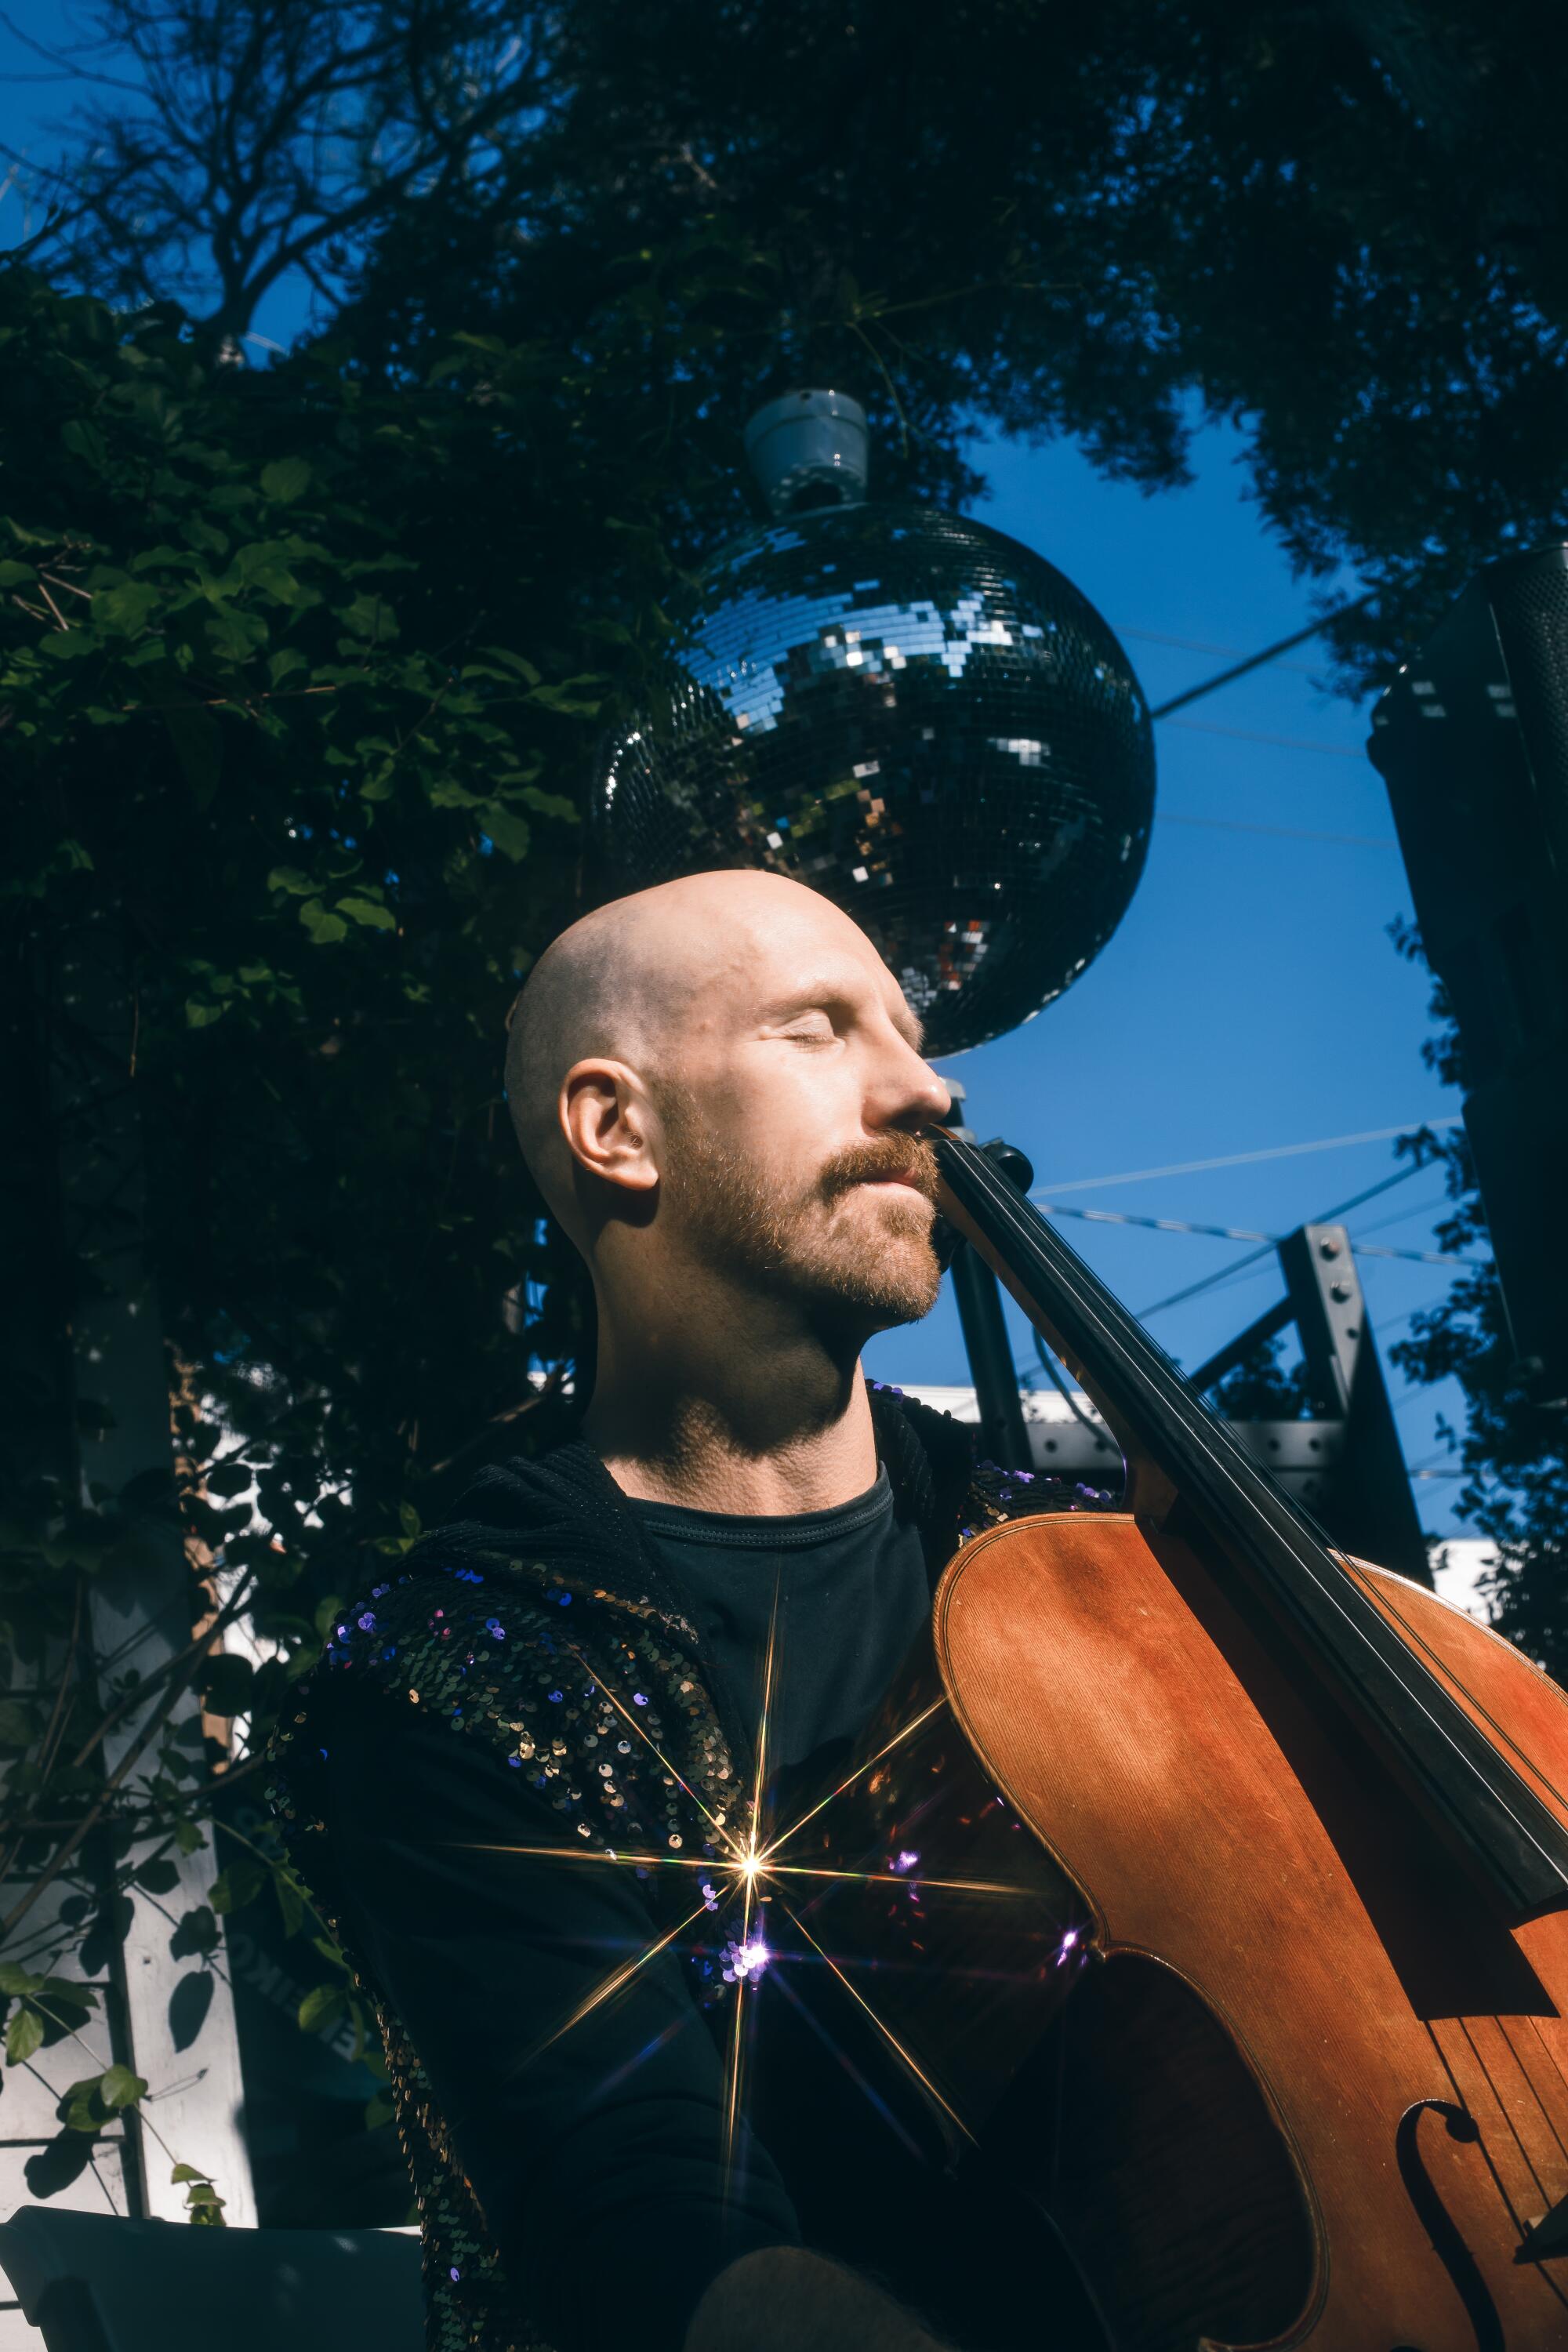 Evan Cudworth sits holding a cello in a backyard.